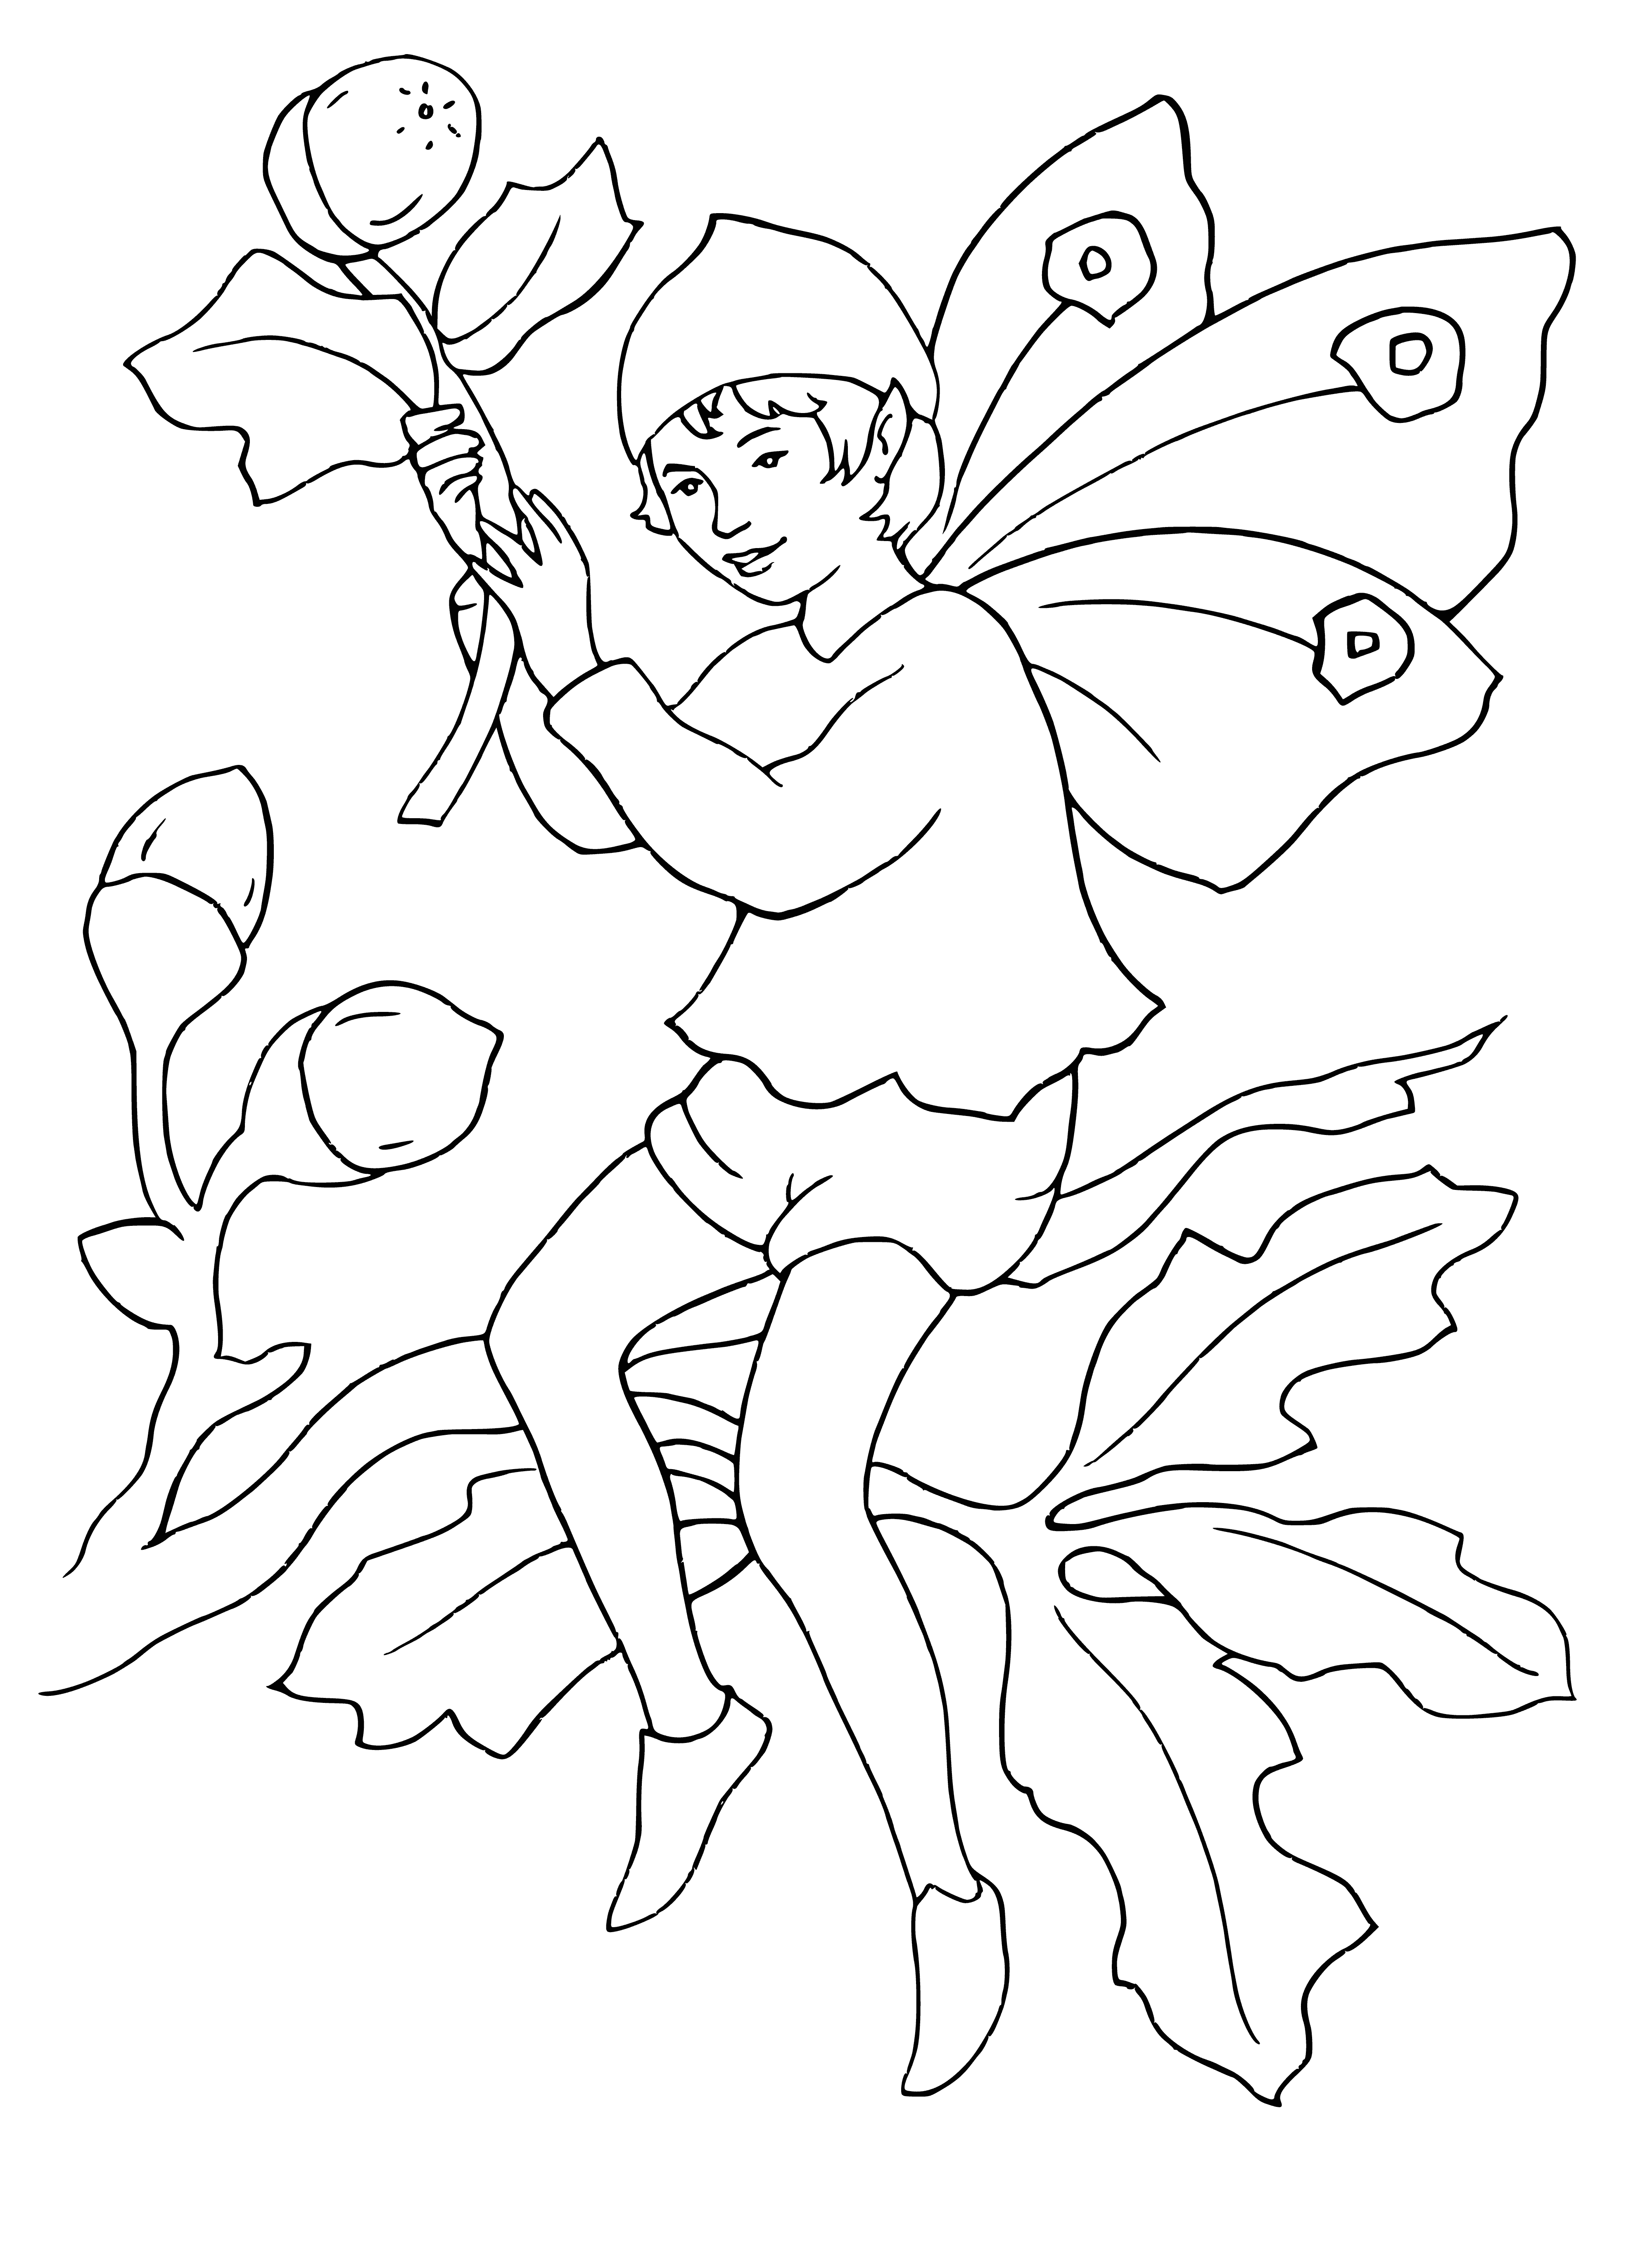 coloring page: Elf sits on branch, reminiscing stories & folklore; sporting a tunic, belt, tools & pouch. Pondering next adventure w/pointy ears & long, slender nose.